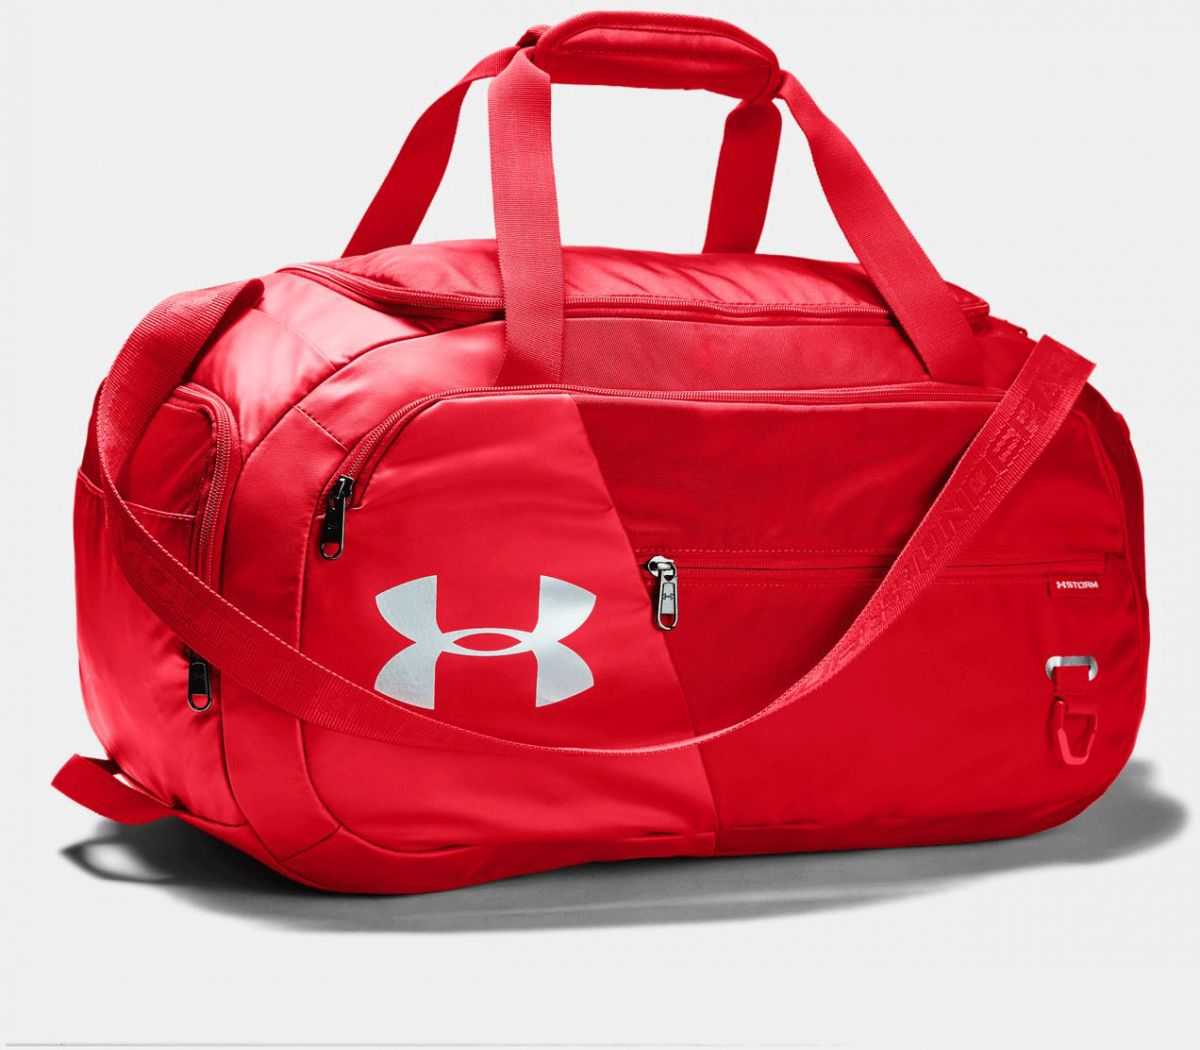 Under Armour Undeniable 4.0 Duffel Bag Red Medium - image 1 of 6